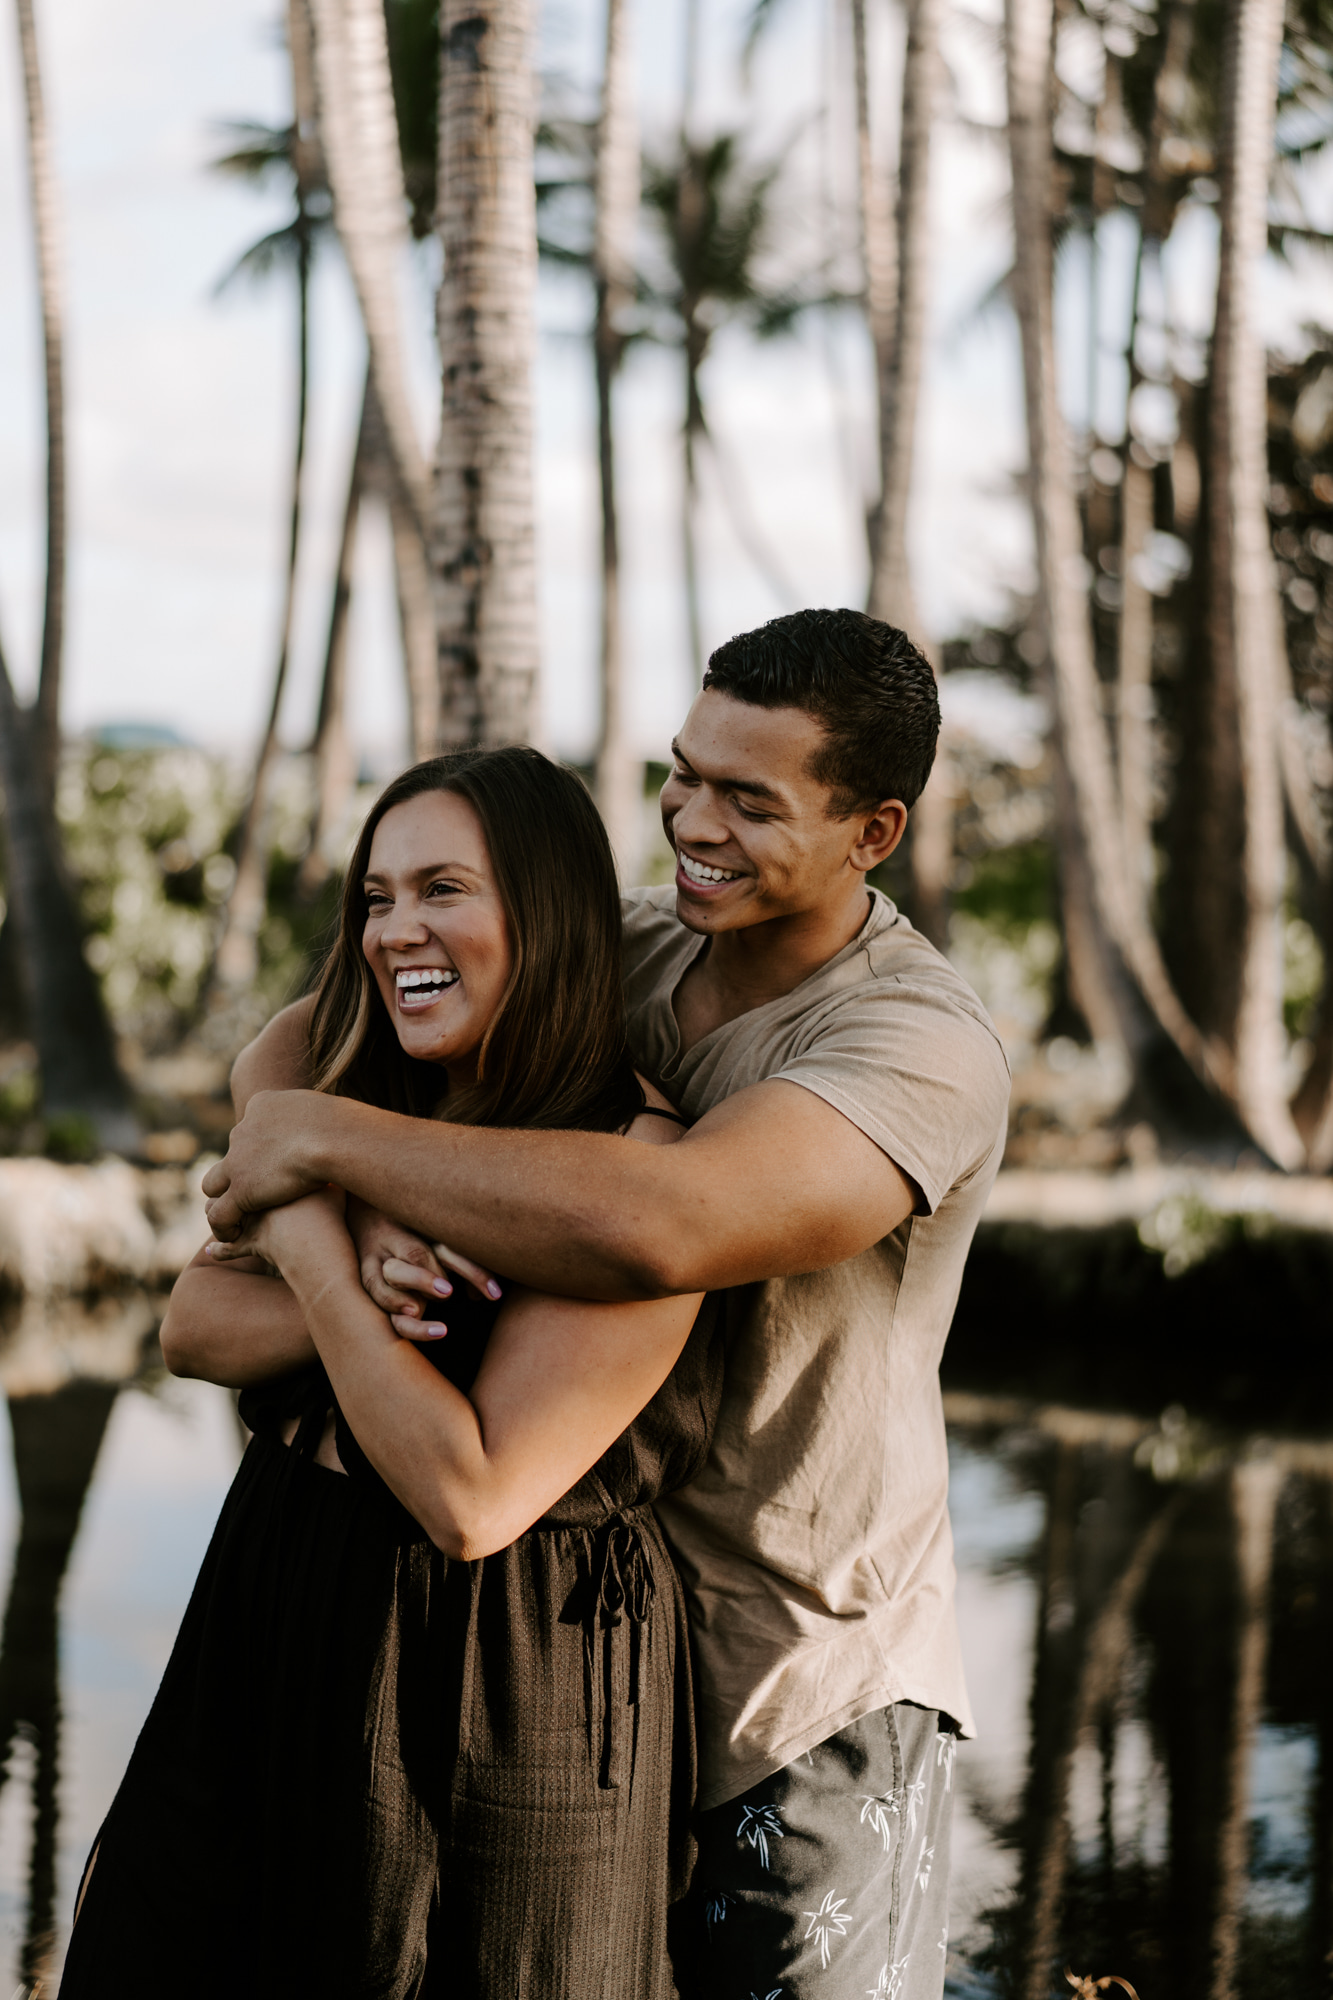 San Francisco blogger Ashley Zeal from Two Peas in a Prada shares "How Our Relationship Changed Post-Engagement." The ten-week wedding countdown is on!